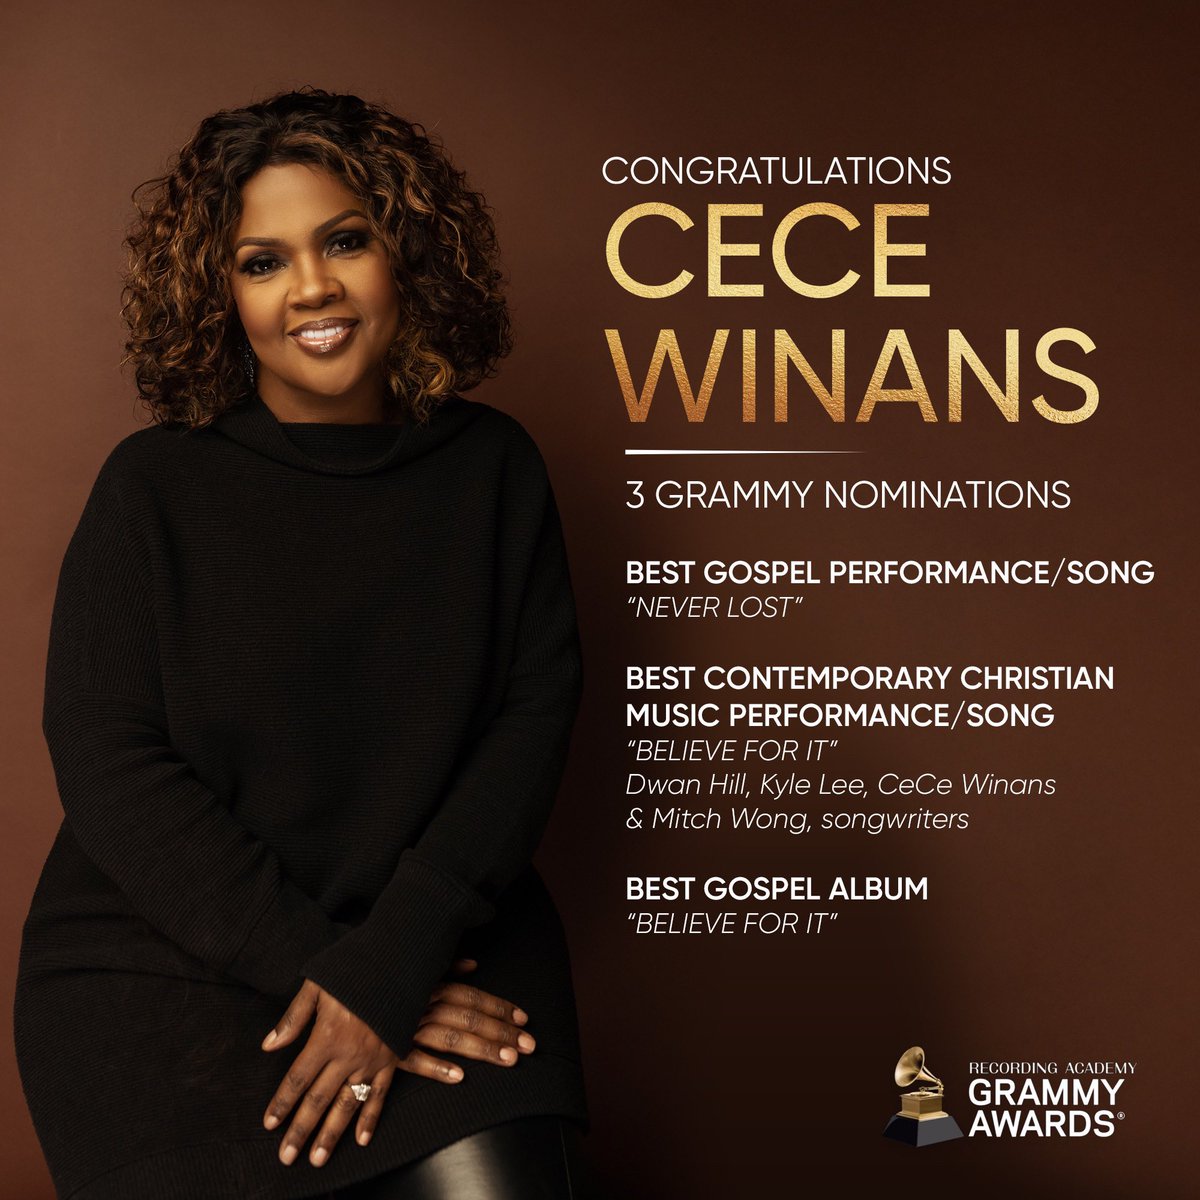 From Team CeCe: We would like to congratulate @cecewinans on her 3 Grammy Nominations. Also, we would like to thank everyone on her team that has contributed to this project in one way or another. We are grateful for you CeCe and wish everyone a Happy Thanksgiving! #grammys